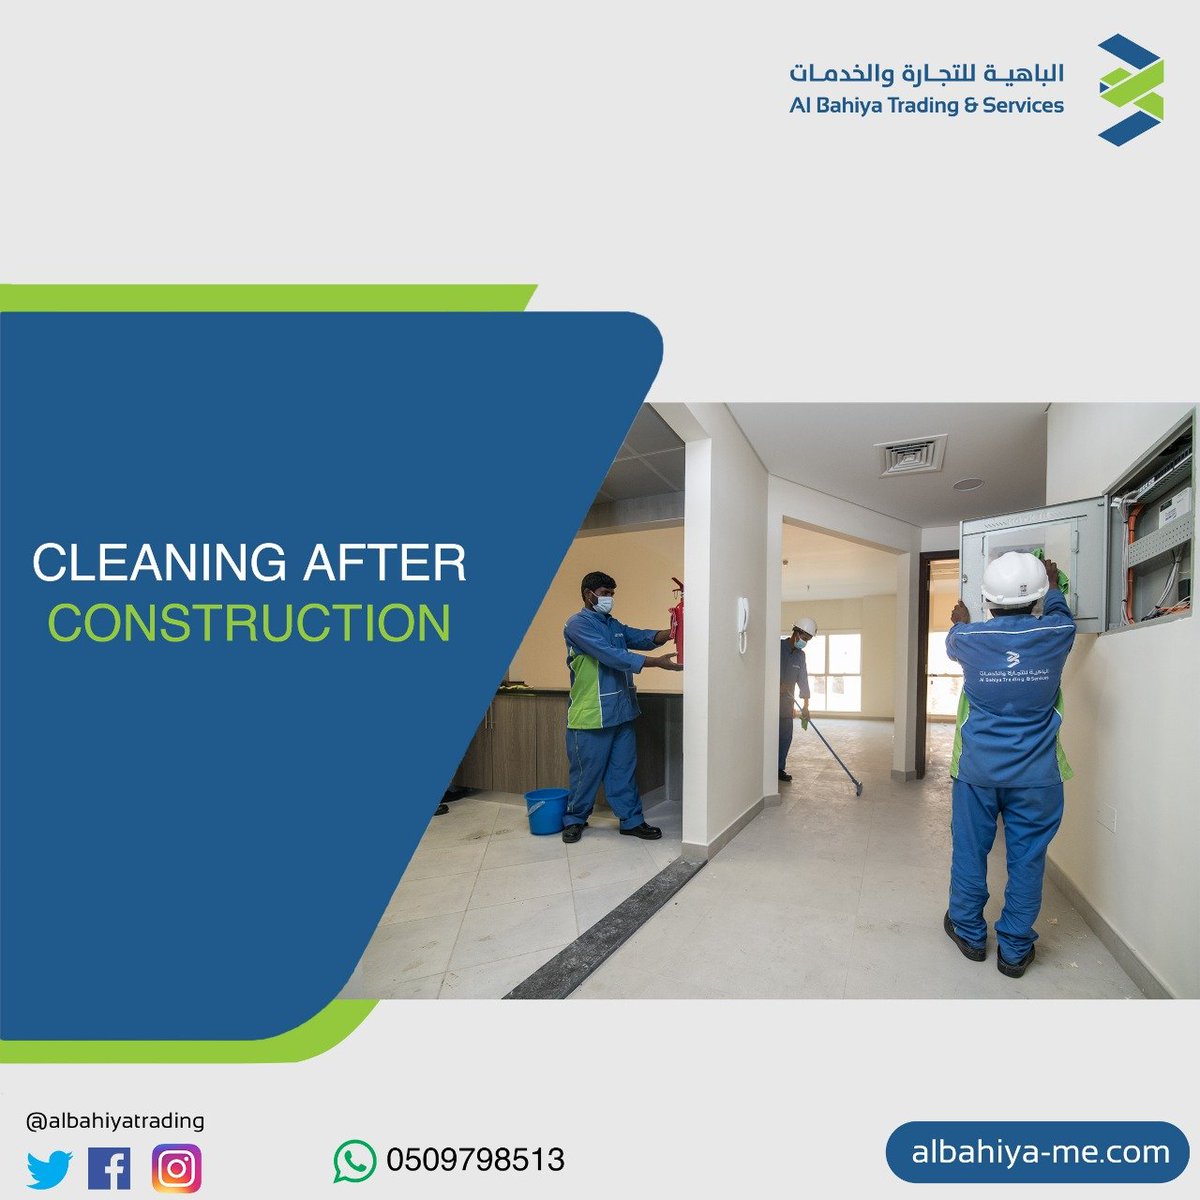 Before moving to a new home or cleaning after construction.
let #Albahiya helps you get your home cleaned and organized, so you can enjoy time with your family.☺️

Make your appointment call us on
0509798513
#cleaningservicesuae #deepcleaningdubai #cleaningaftercontruction